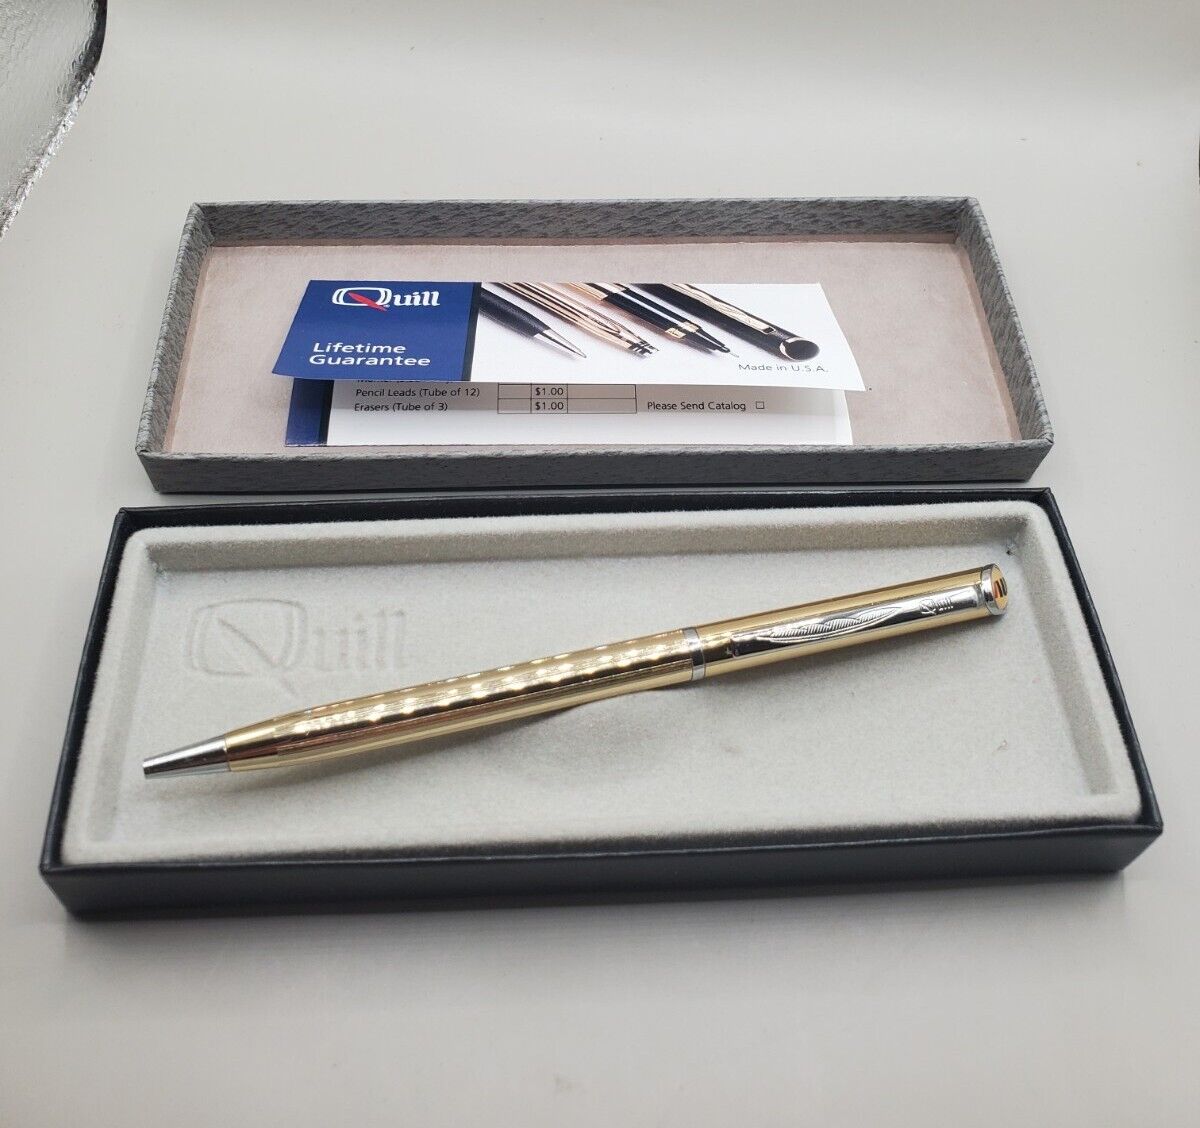 Vintage QUILL Gold Tone Ball Point Pen USA Made with Box WORKS 